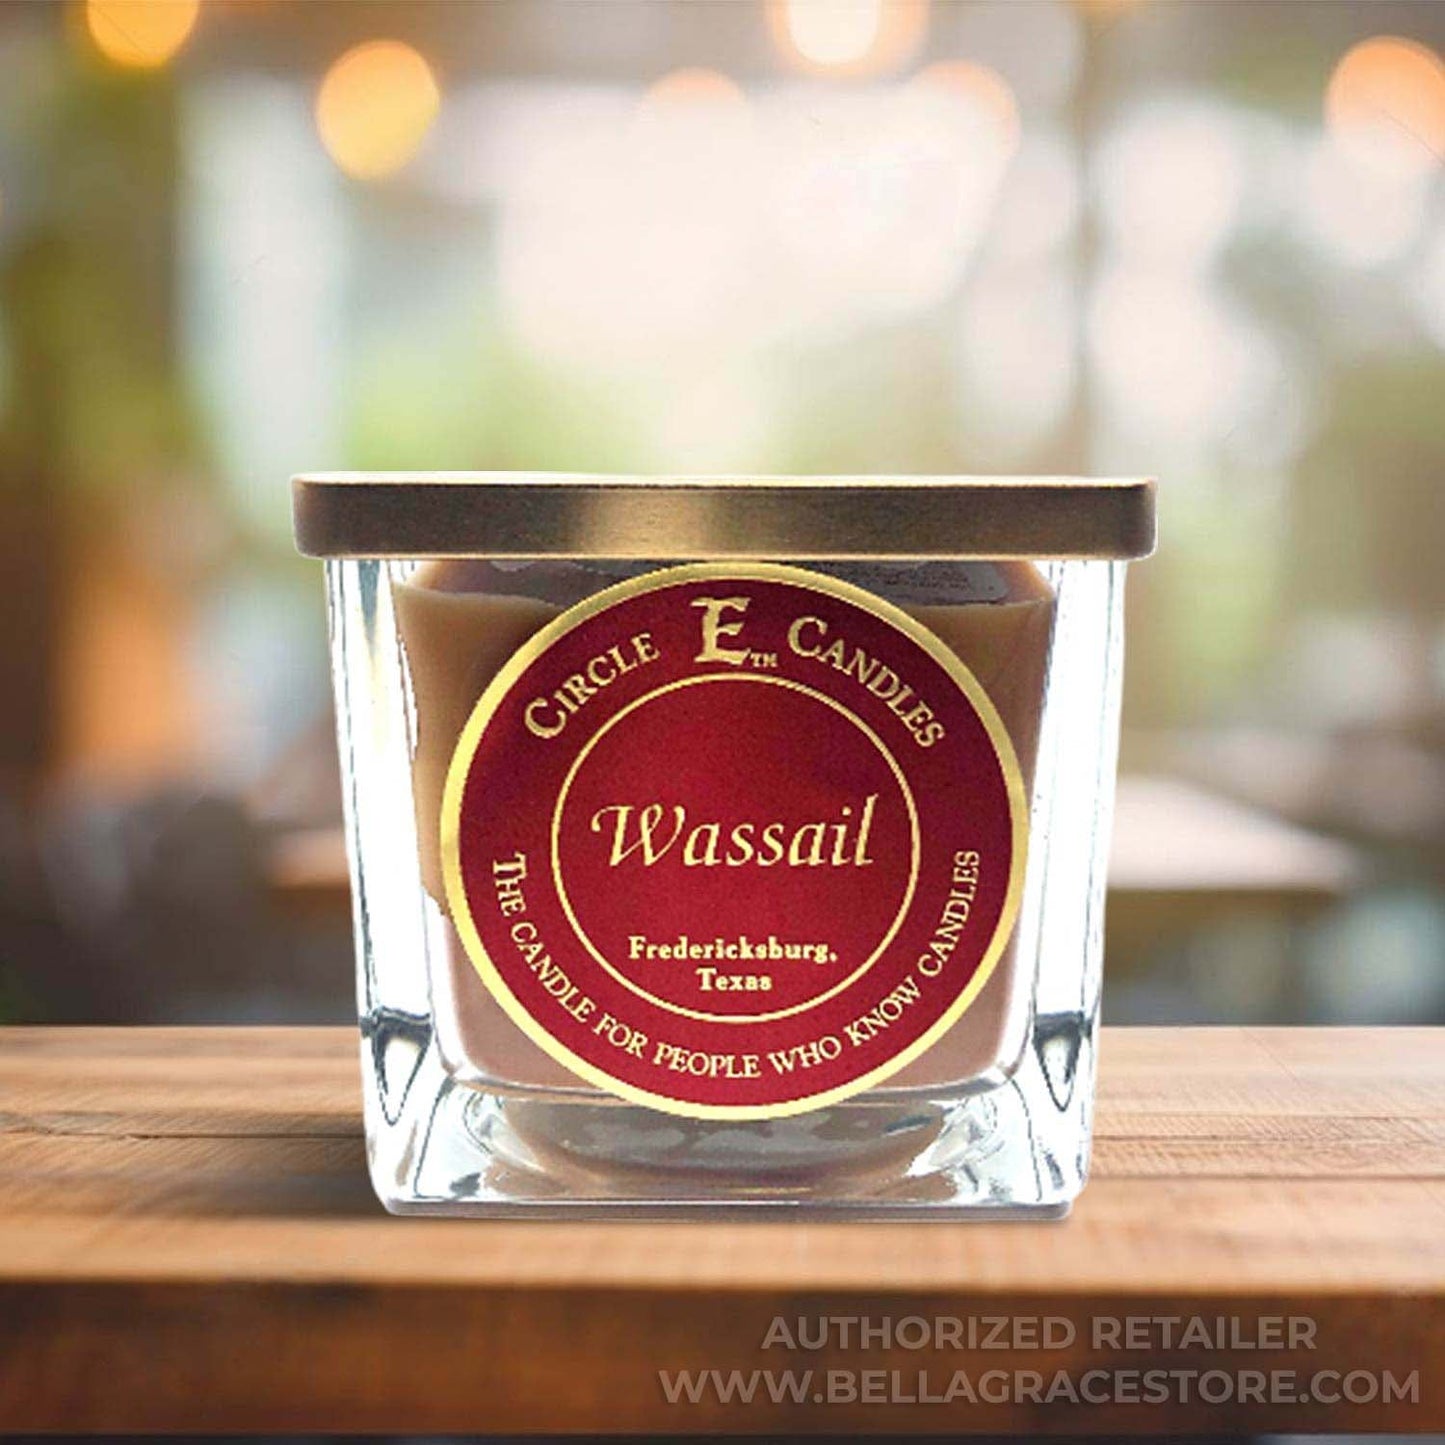 Circle E Candles, Wassail Scent, Small Size Jar Candle, 8oz, 1 Wick